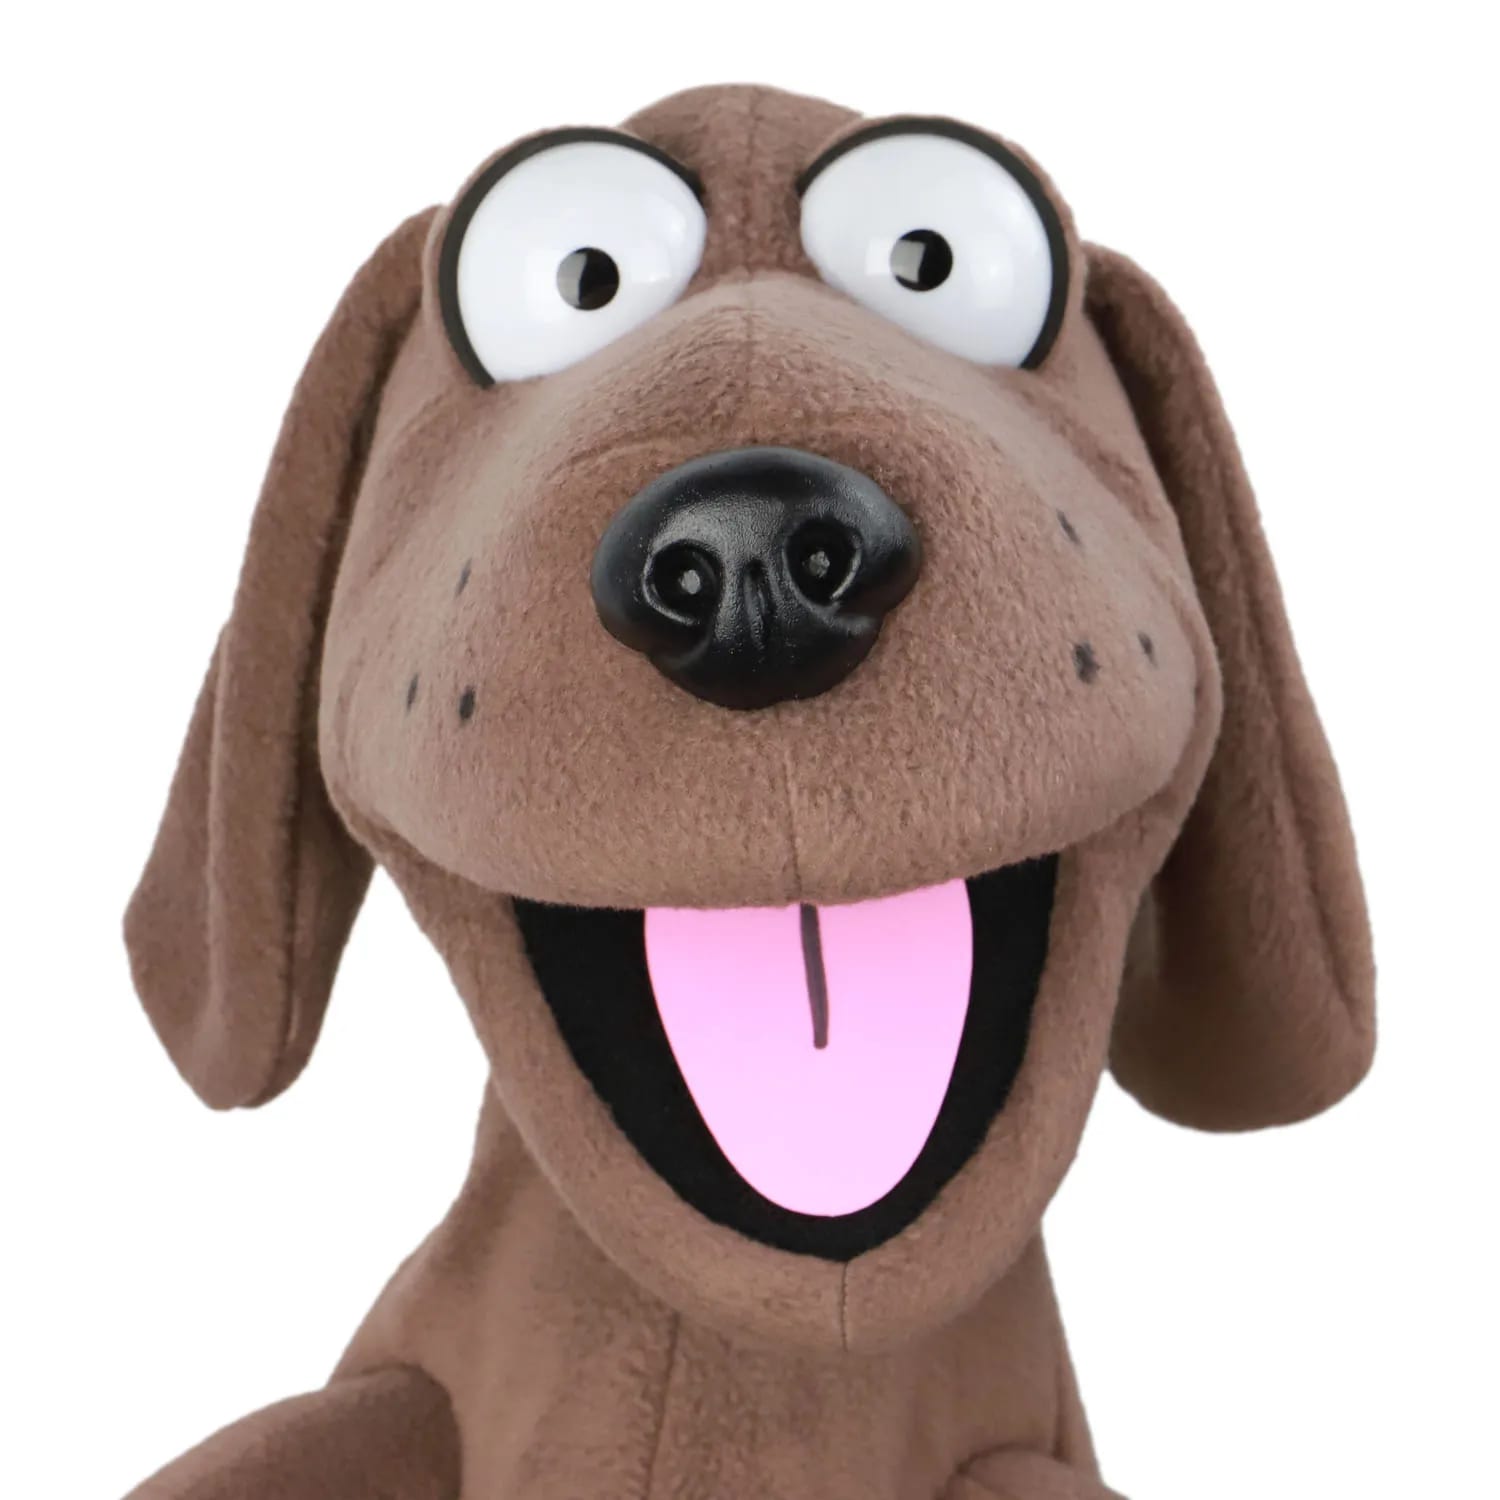 Dudley the Dog - Professional Vent Puppet